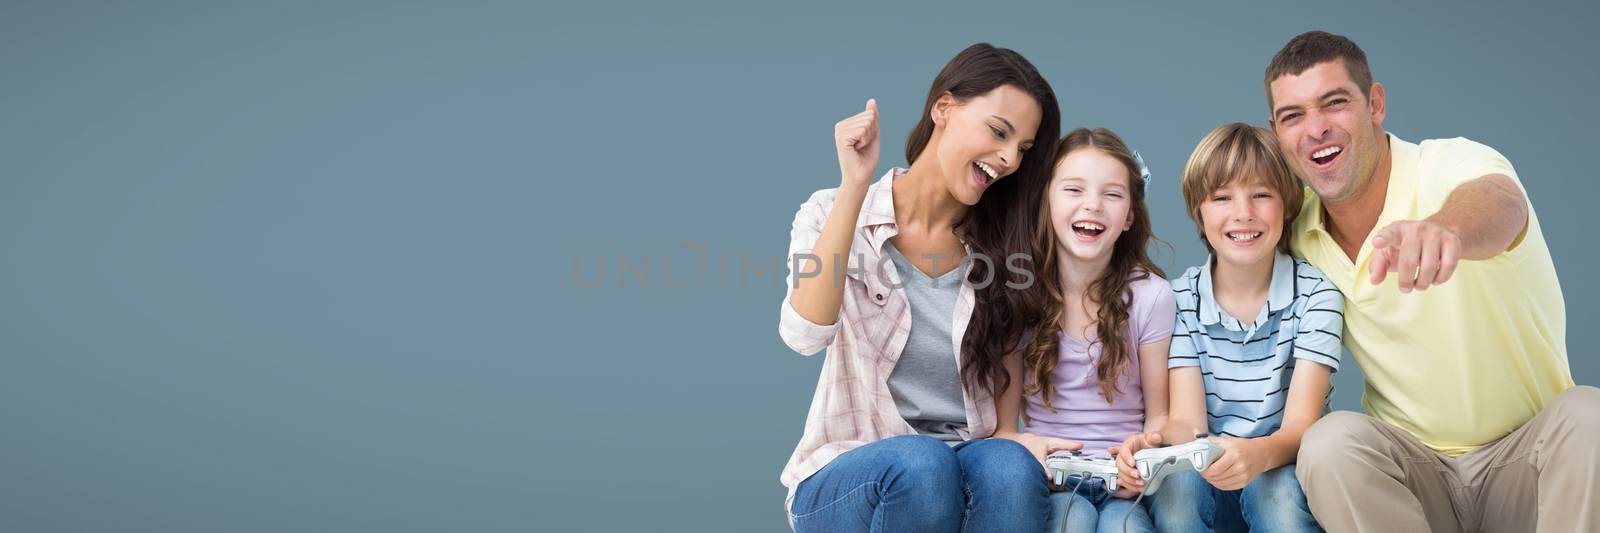 Digital composite of Family having fun together with blank background